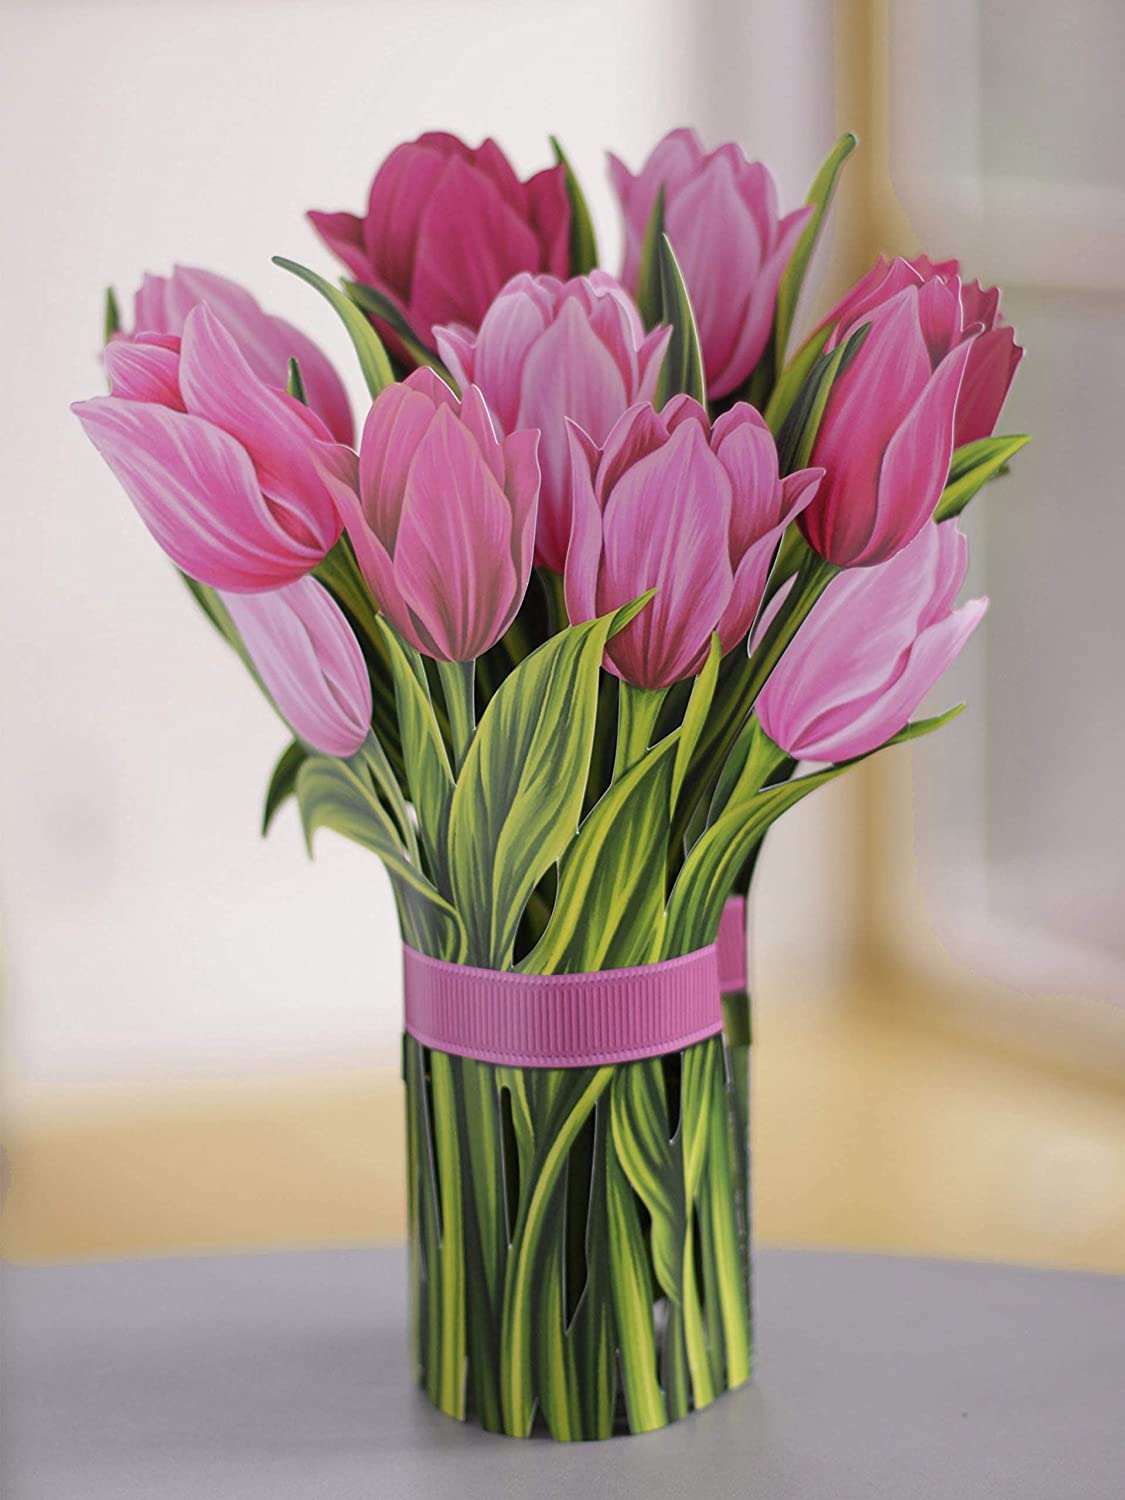 Life Sized Pop-Up Flower Bouquet: Pink Tulips